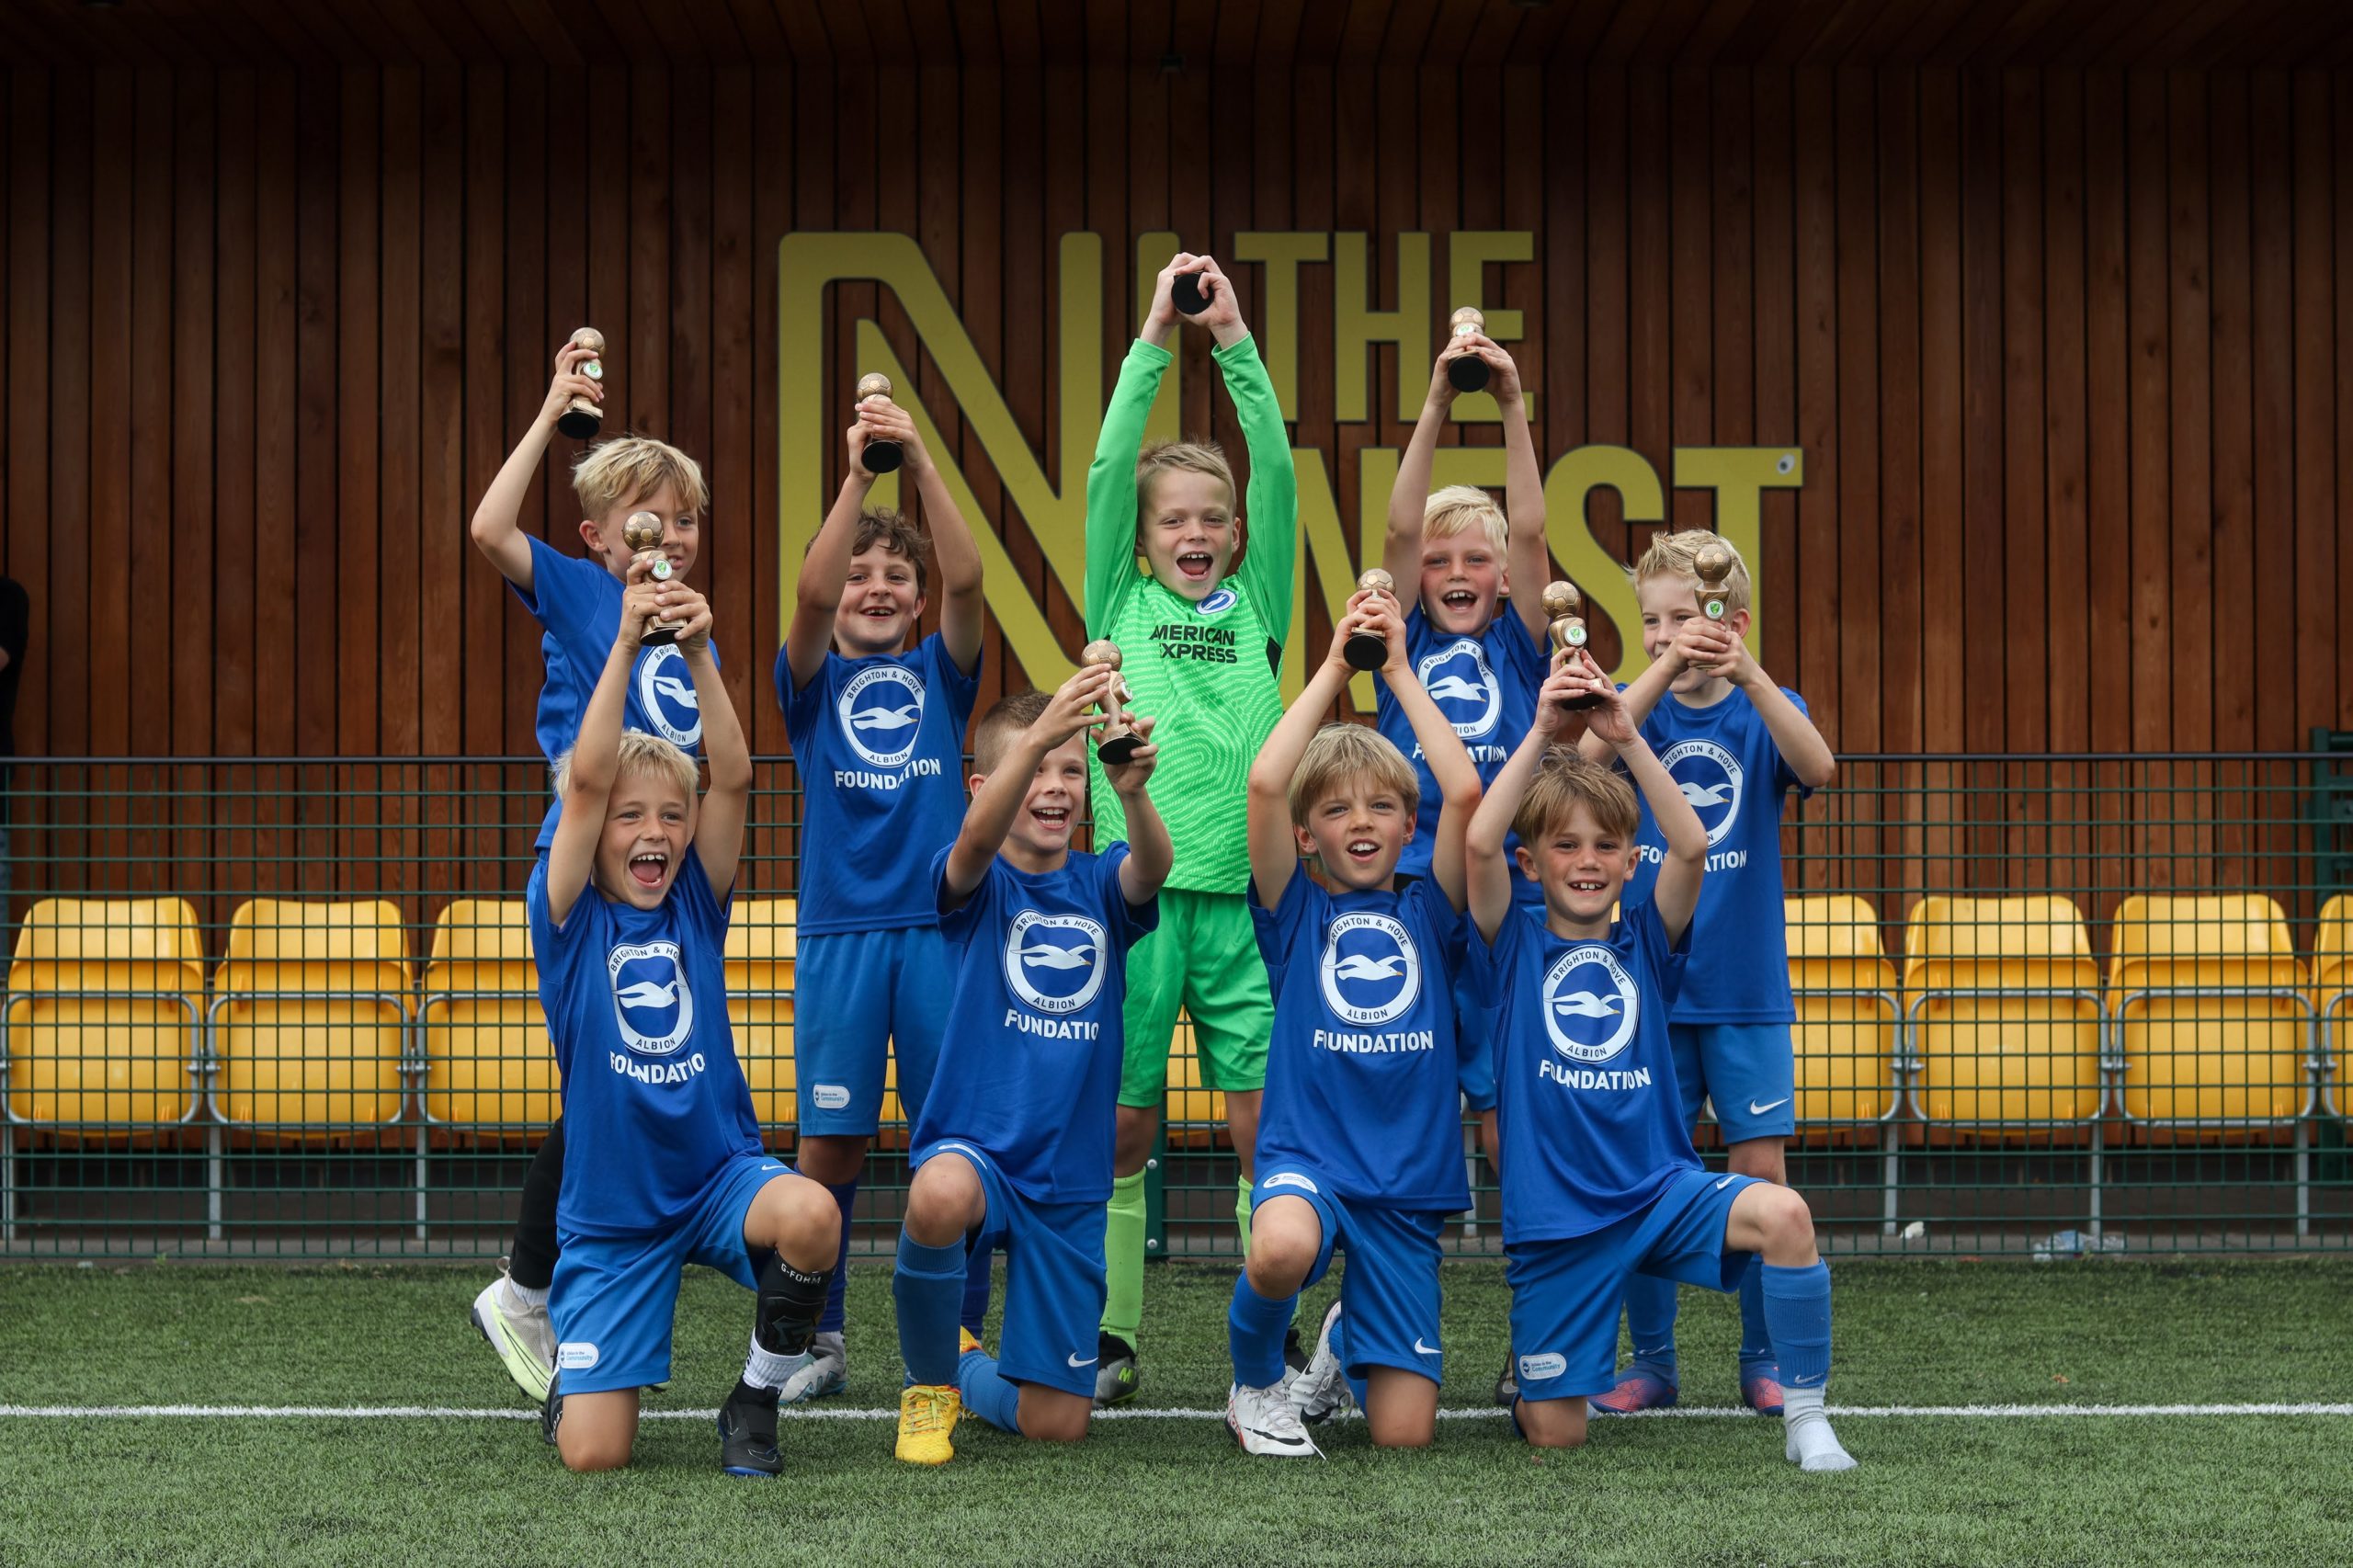 Foundation teams celebrate amazing success at Canary Cup tournament